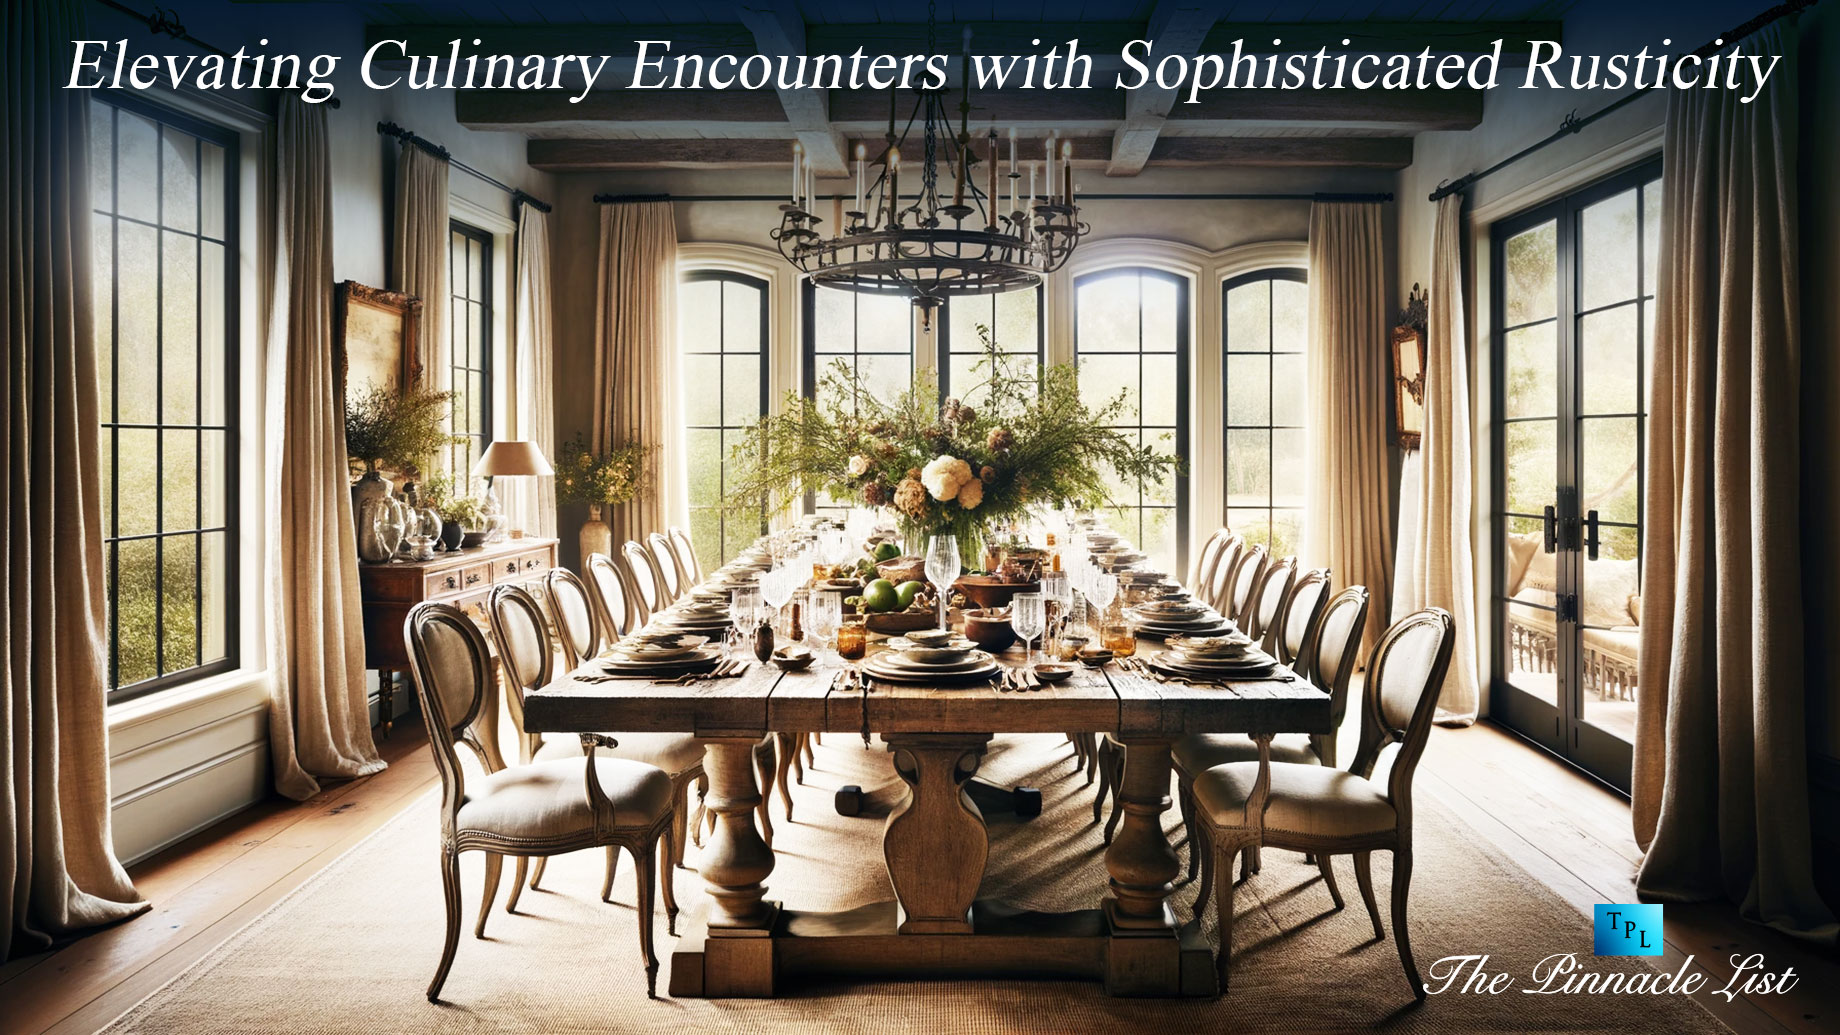 Elevating Culinary Encounters with Sophisticated Rusticity